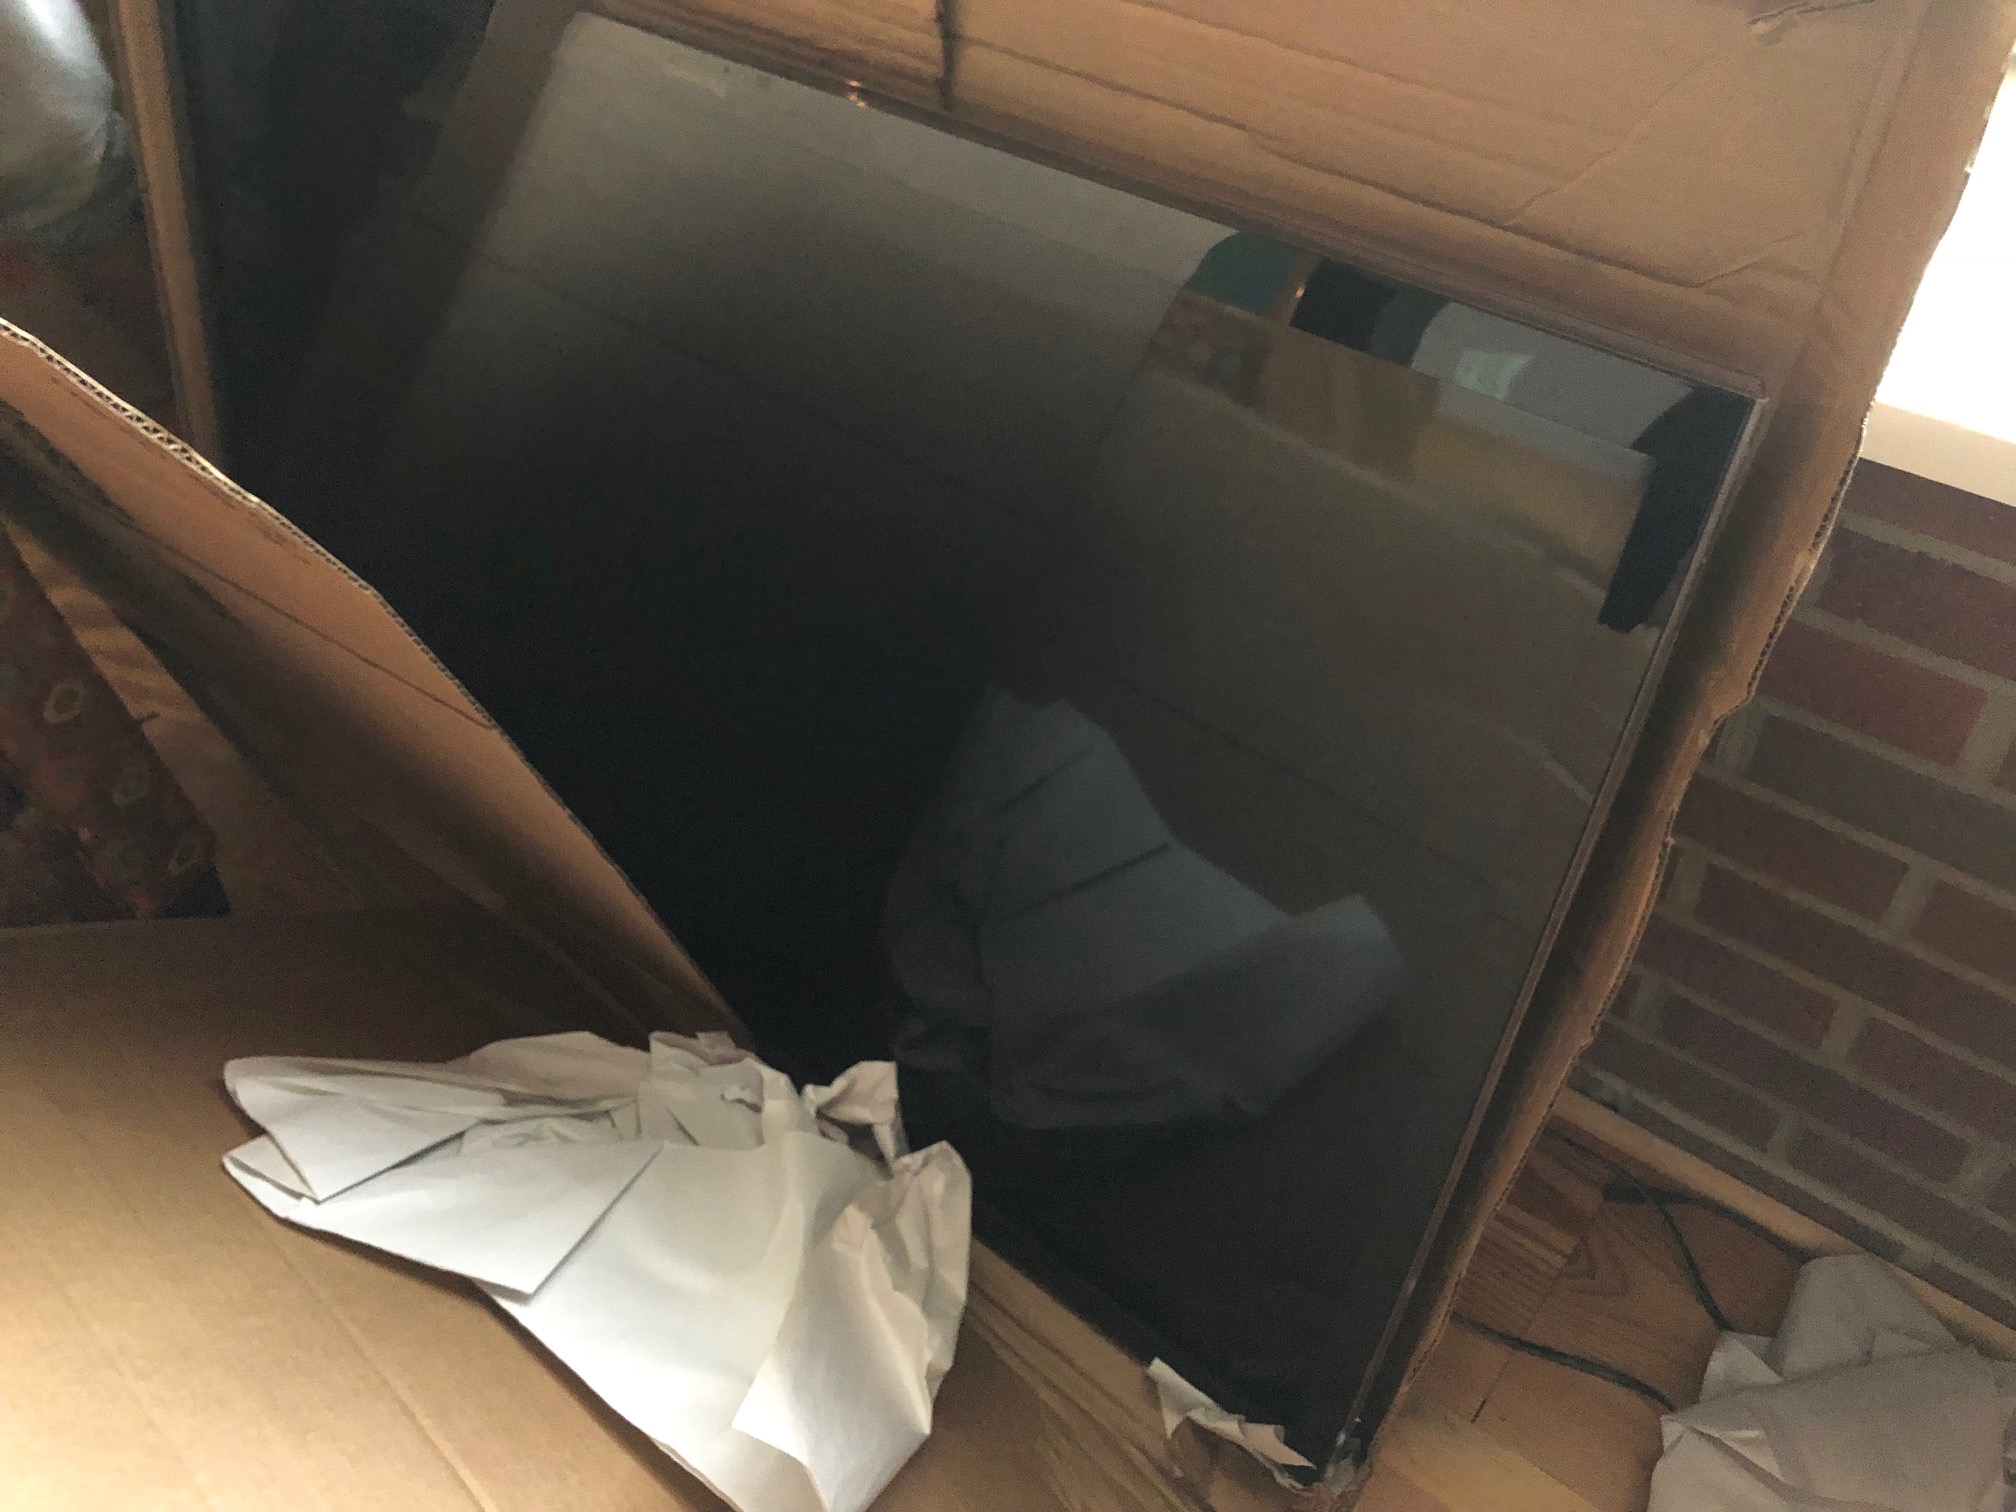 Eden's - this isn't how to pack a TV!